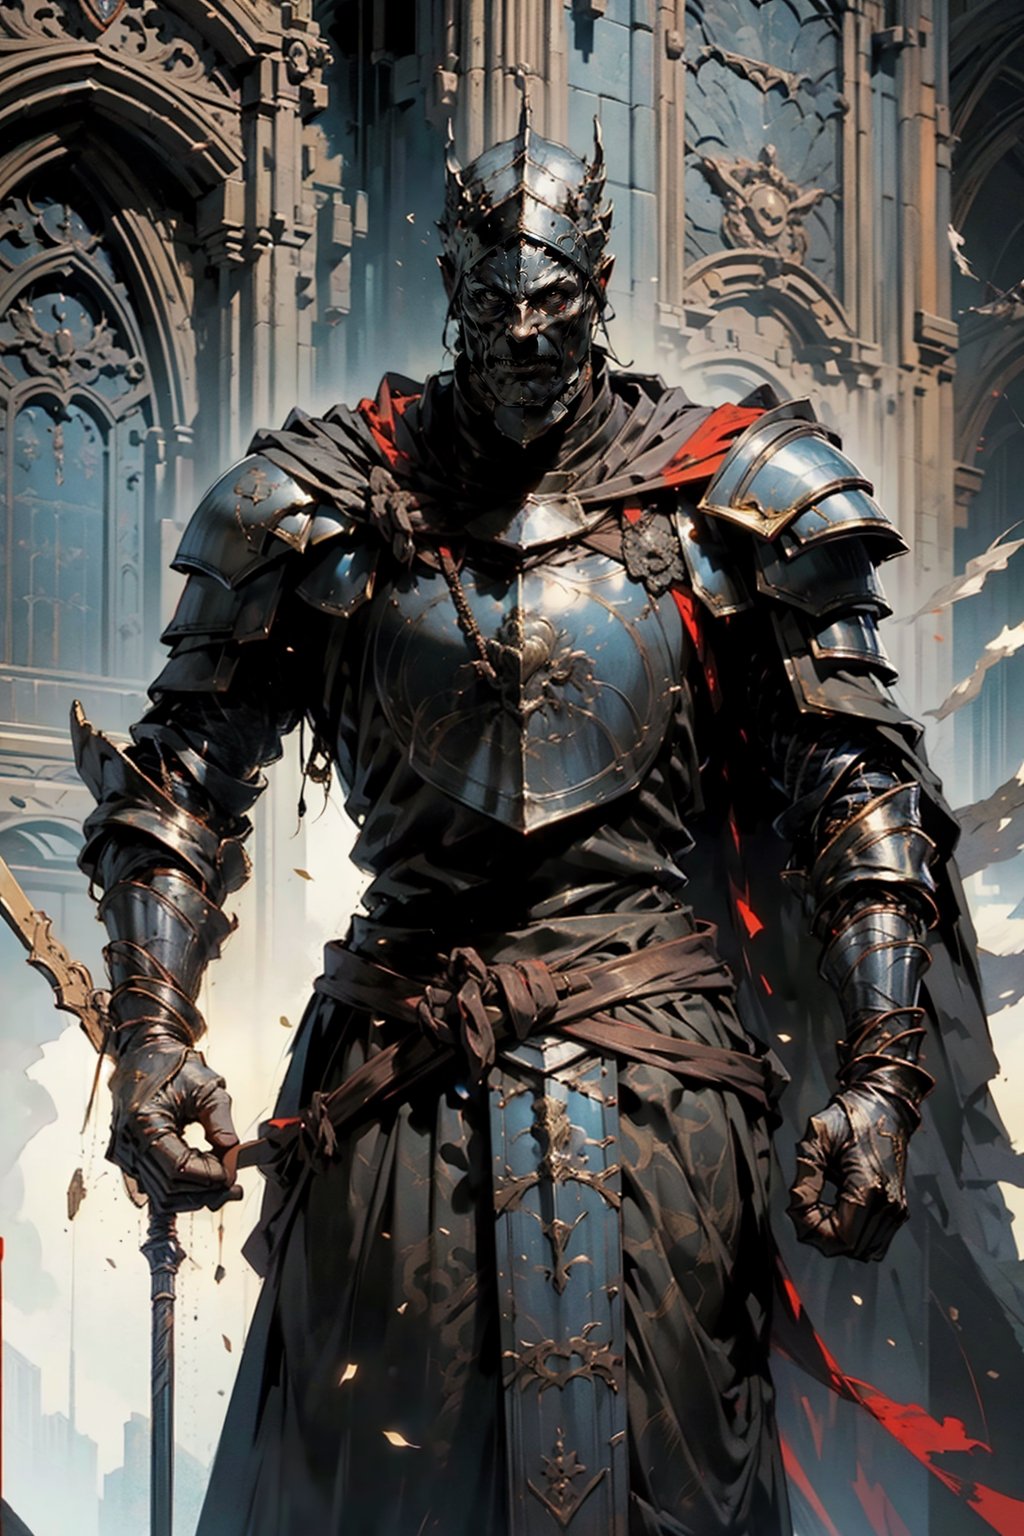 high quality, higher details, masterpiece, beautiful, 4k, 8k, epic ((full shot)), knight's high-ranking armor

The armor of a high-ranking knight would be impressive and elaborate, designed for both protection and to showcase their status and power. It would be made of the highest-quality tempered steel or forged iron, with intricate handcrafted details and gold or silver ornamentation denoting their authority.

The helm would be imposing, with a decorated visor and additional face and neck protection. Adornments on the helm might include protruding feathers or crests, indicating their status as a military leader or noble.

The breastplate and pauldrons would be broad and sturdy, providing maximum protection for the torso and shoulders. They would be decorated with heraldic emblems identifying their lineage and loyalties.

The greaves and sabatons would be designed to protect the legs and feet while allowing necessary mobility on the battlefield. They might feature intricate engravings reflecting the knight's history and deeds.

In addition to the main armor, the knight might wear an elaborate cape of bright colors, adorned with symbols of their house or kingdom. This cape would not only provide some additional protection but also add a touch of elegance and majesty to their appearance.

Overall, the armor of a high-ranking knight would be an impressive and functional work of art, reflecting their status, power, and skill in battle.,Soul_of_Cinder,Artorias,nodf_lora,weapon